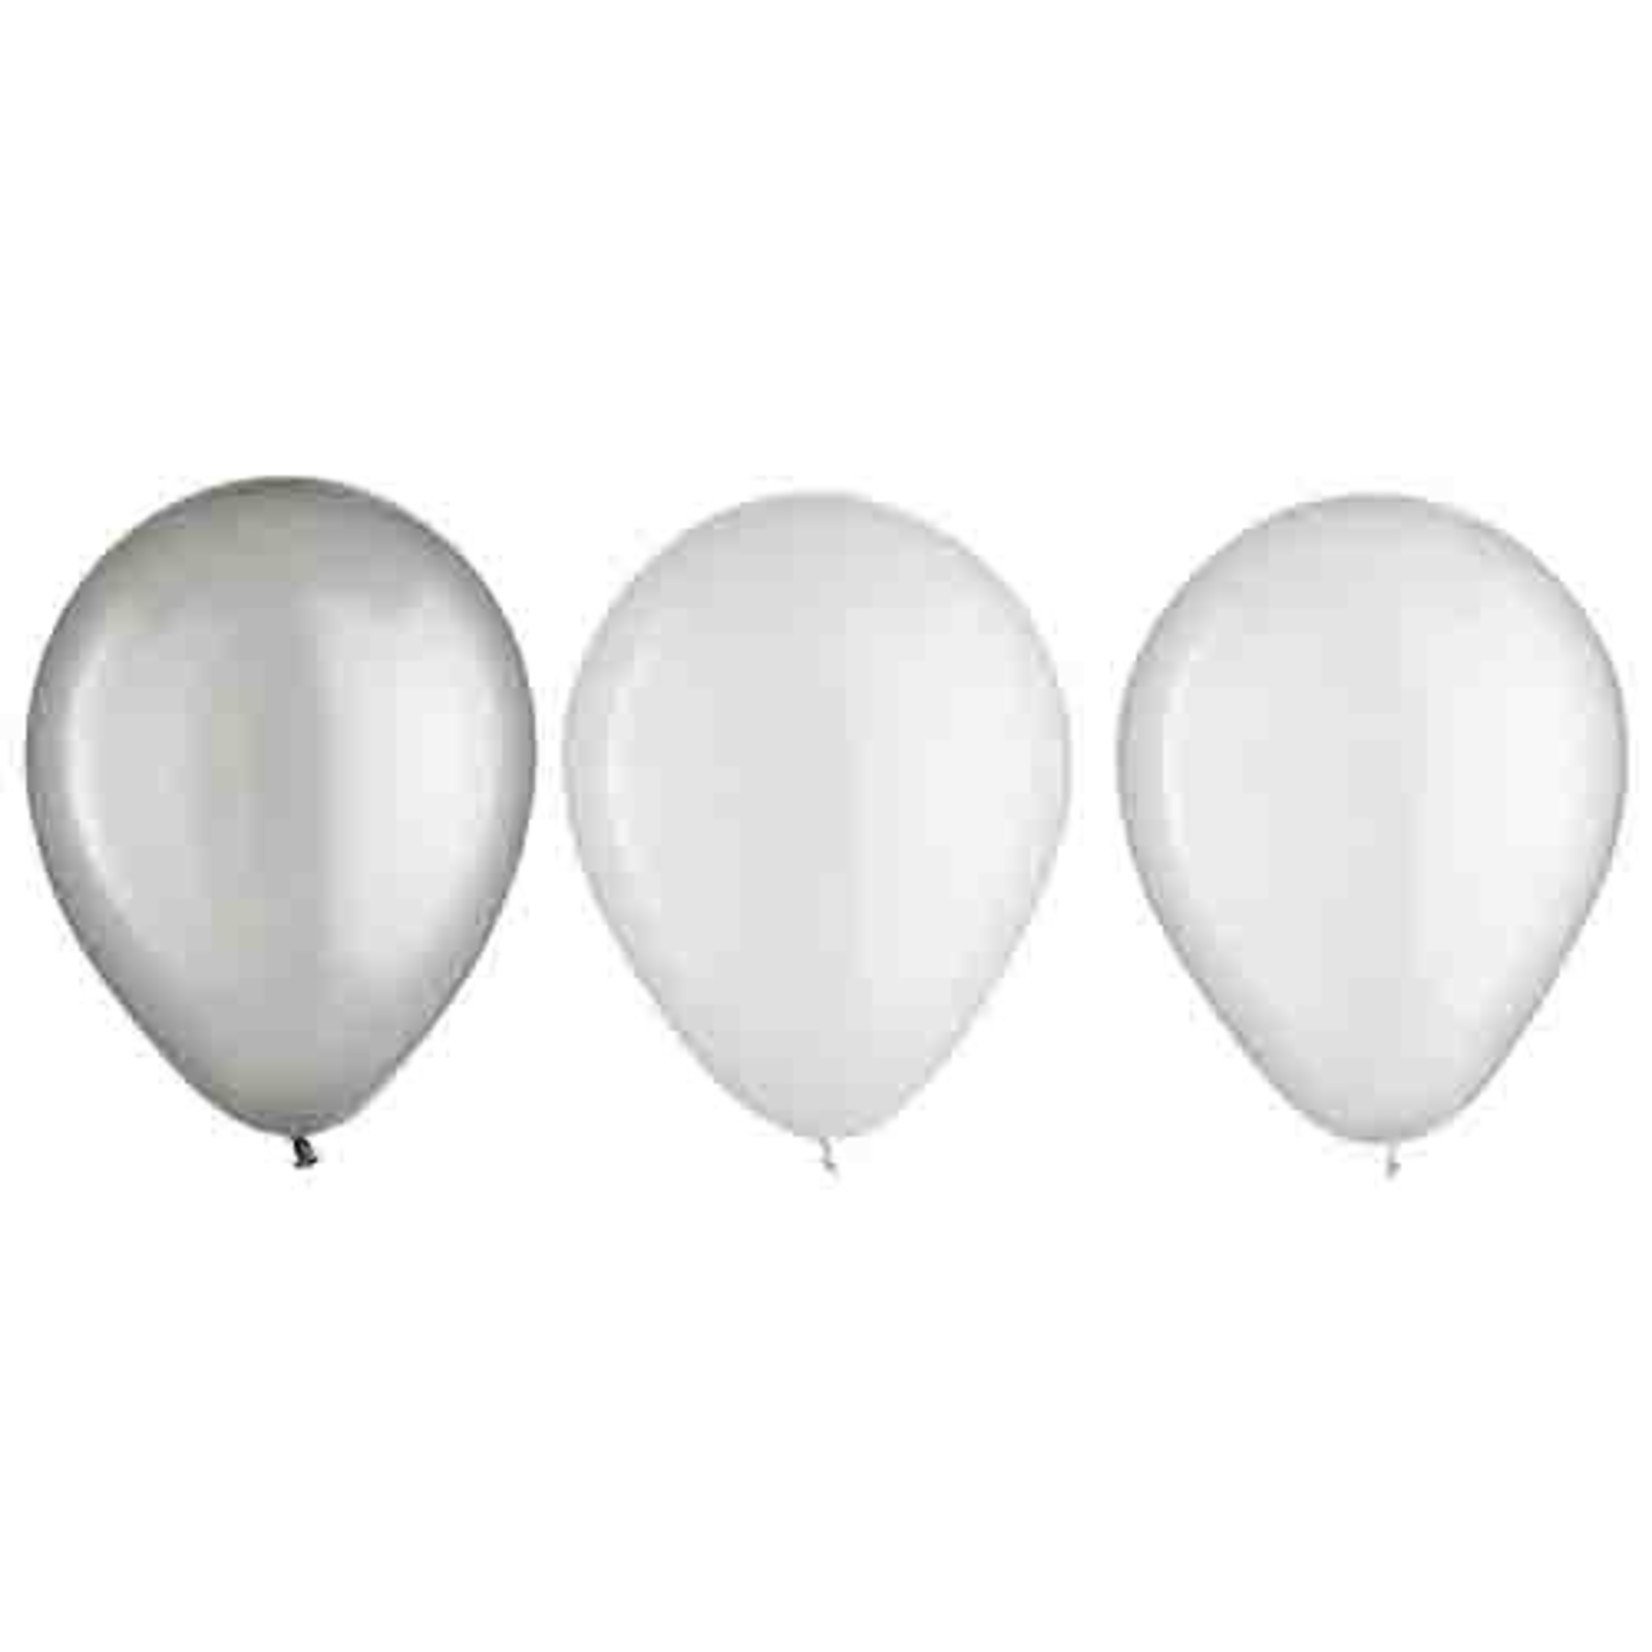 Amscan 5" Platinum Silver Assorted Latex Balloons - 25ct.